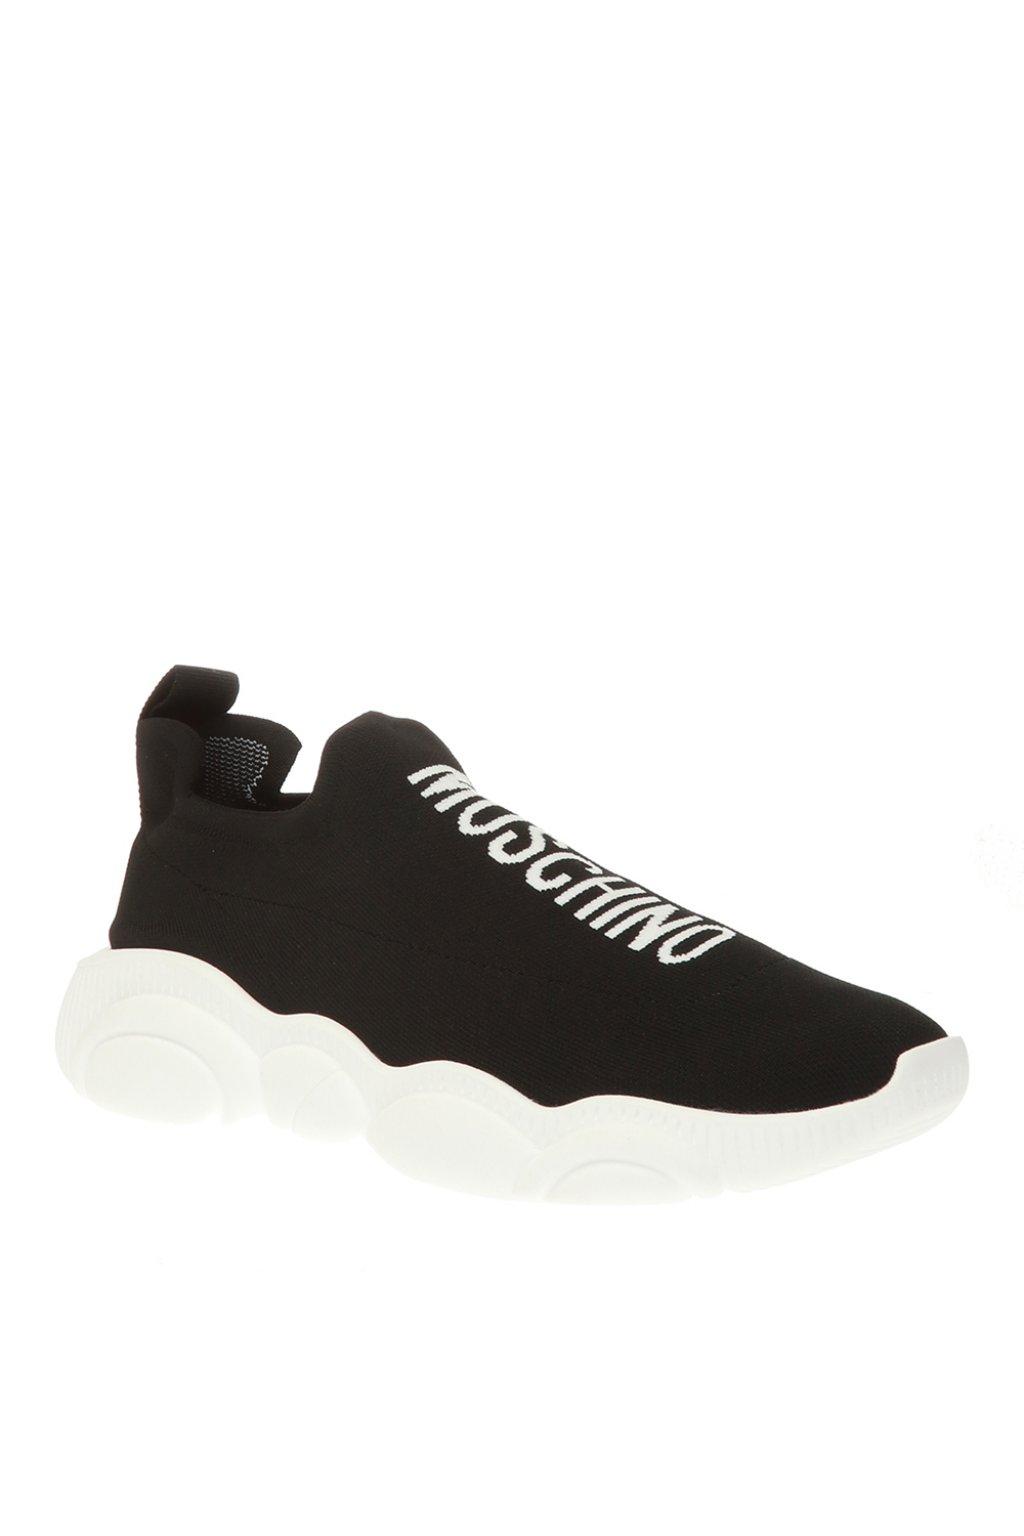 Moschino Sock Sneakers With Logo in Black for Men - Lyst